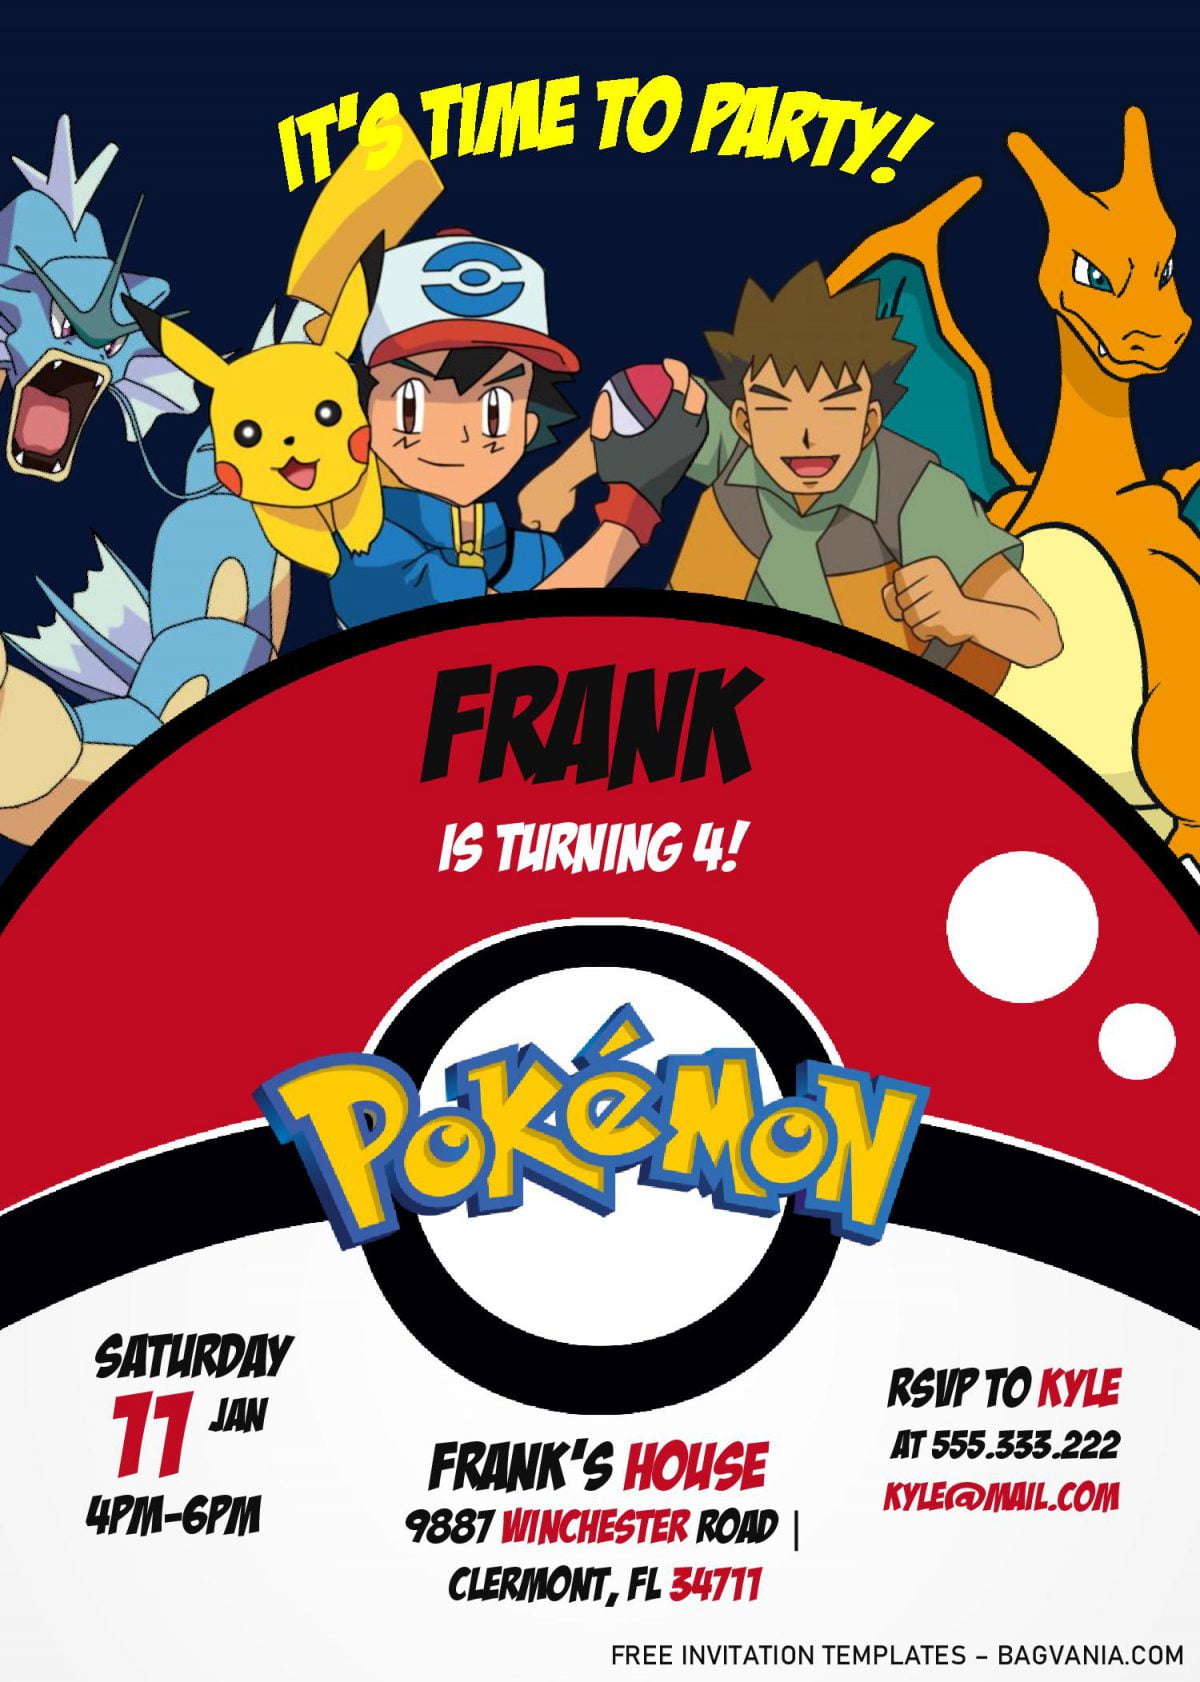 Pokemon Invitation Templates - Editable With MS Word and has dark blue background